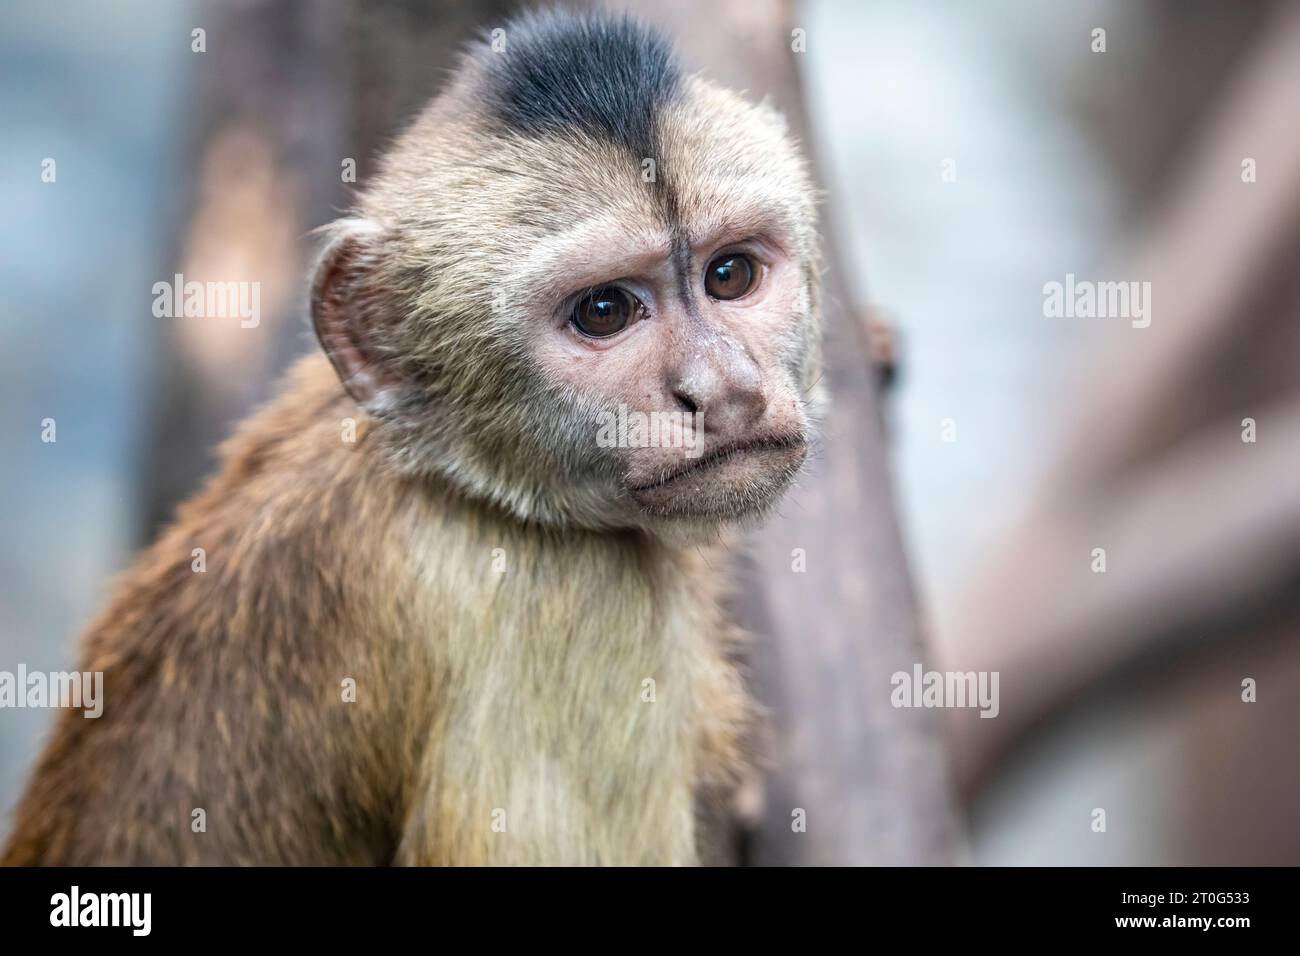 The wedge-capped capuchin (Cebus olivaceus) is a capuchin monkey from South America. It is found in northern Brazil, Guyana and Venezuela. Stock Photo